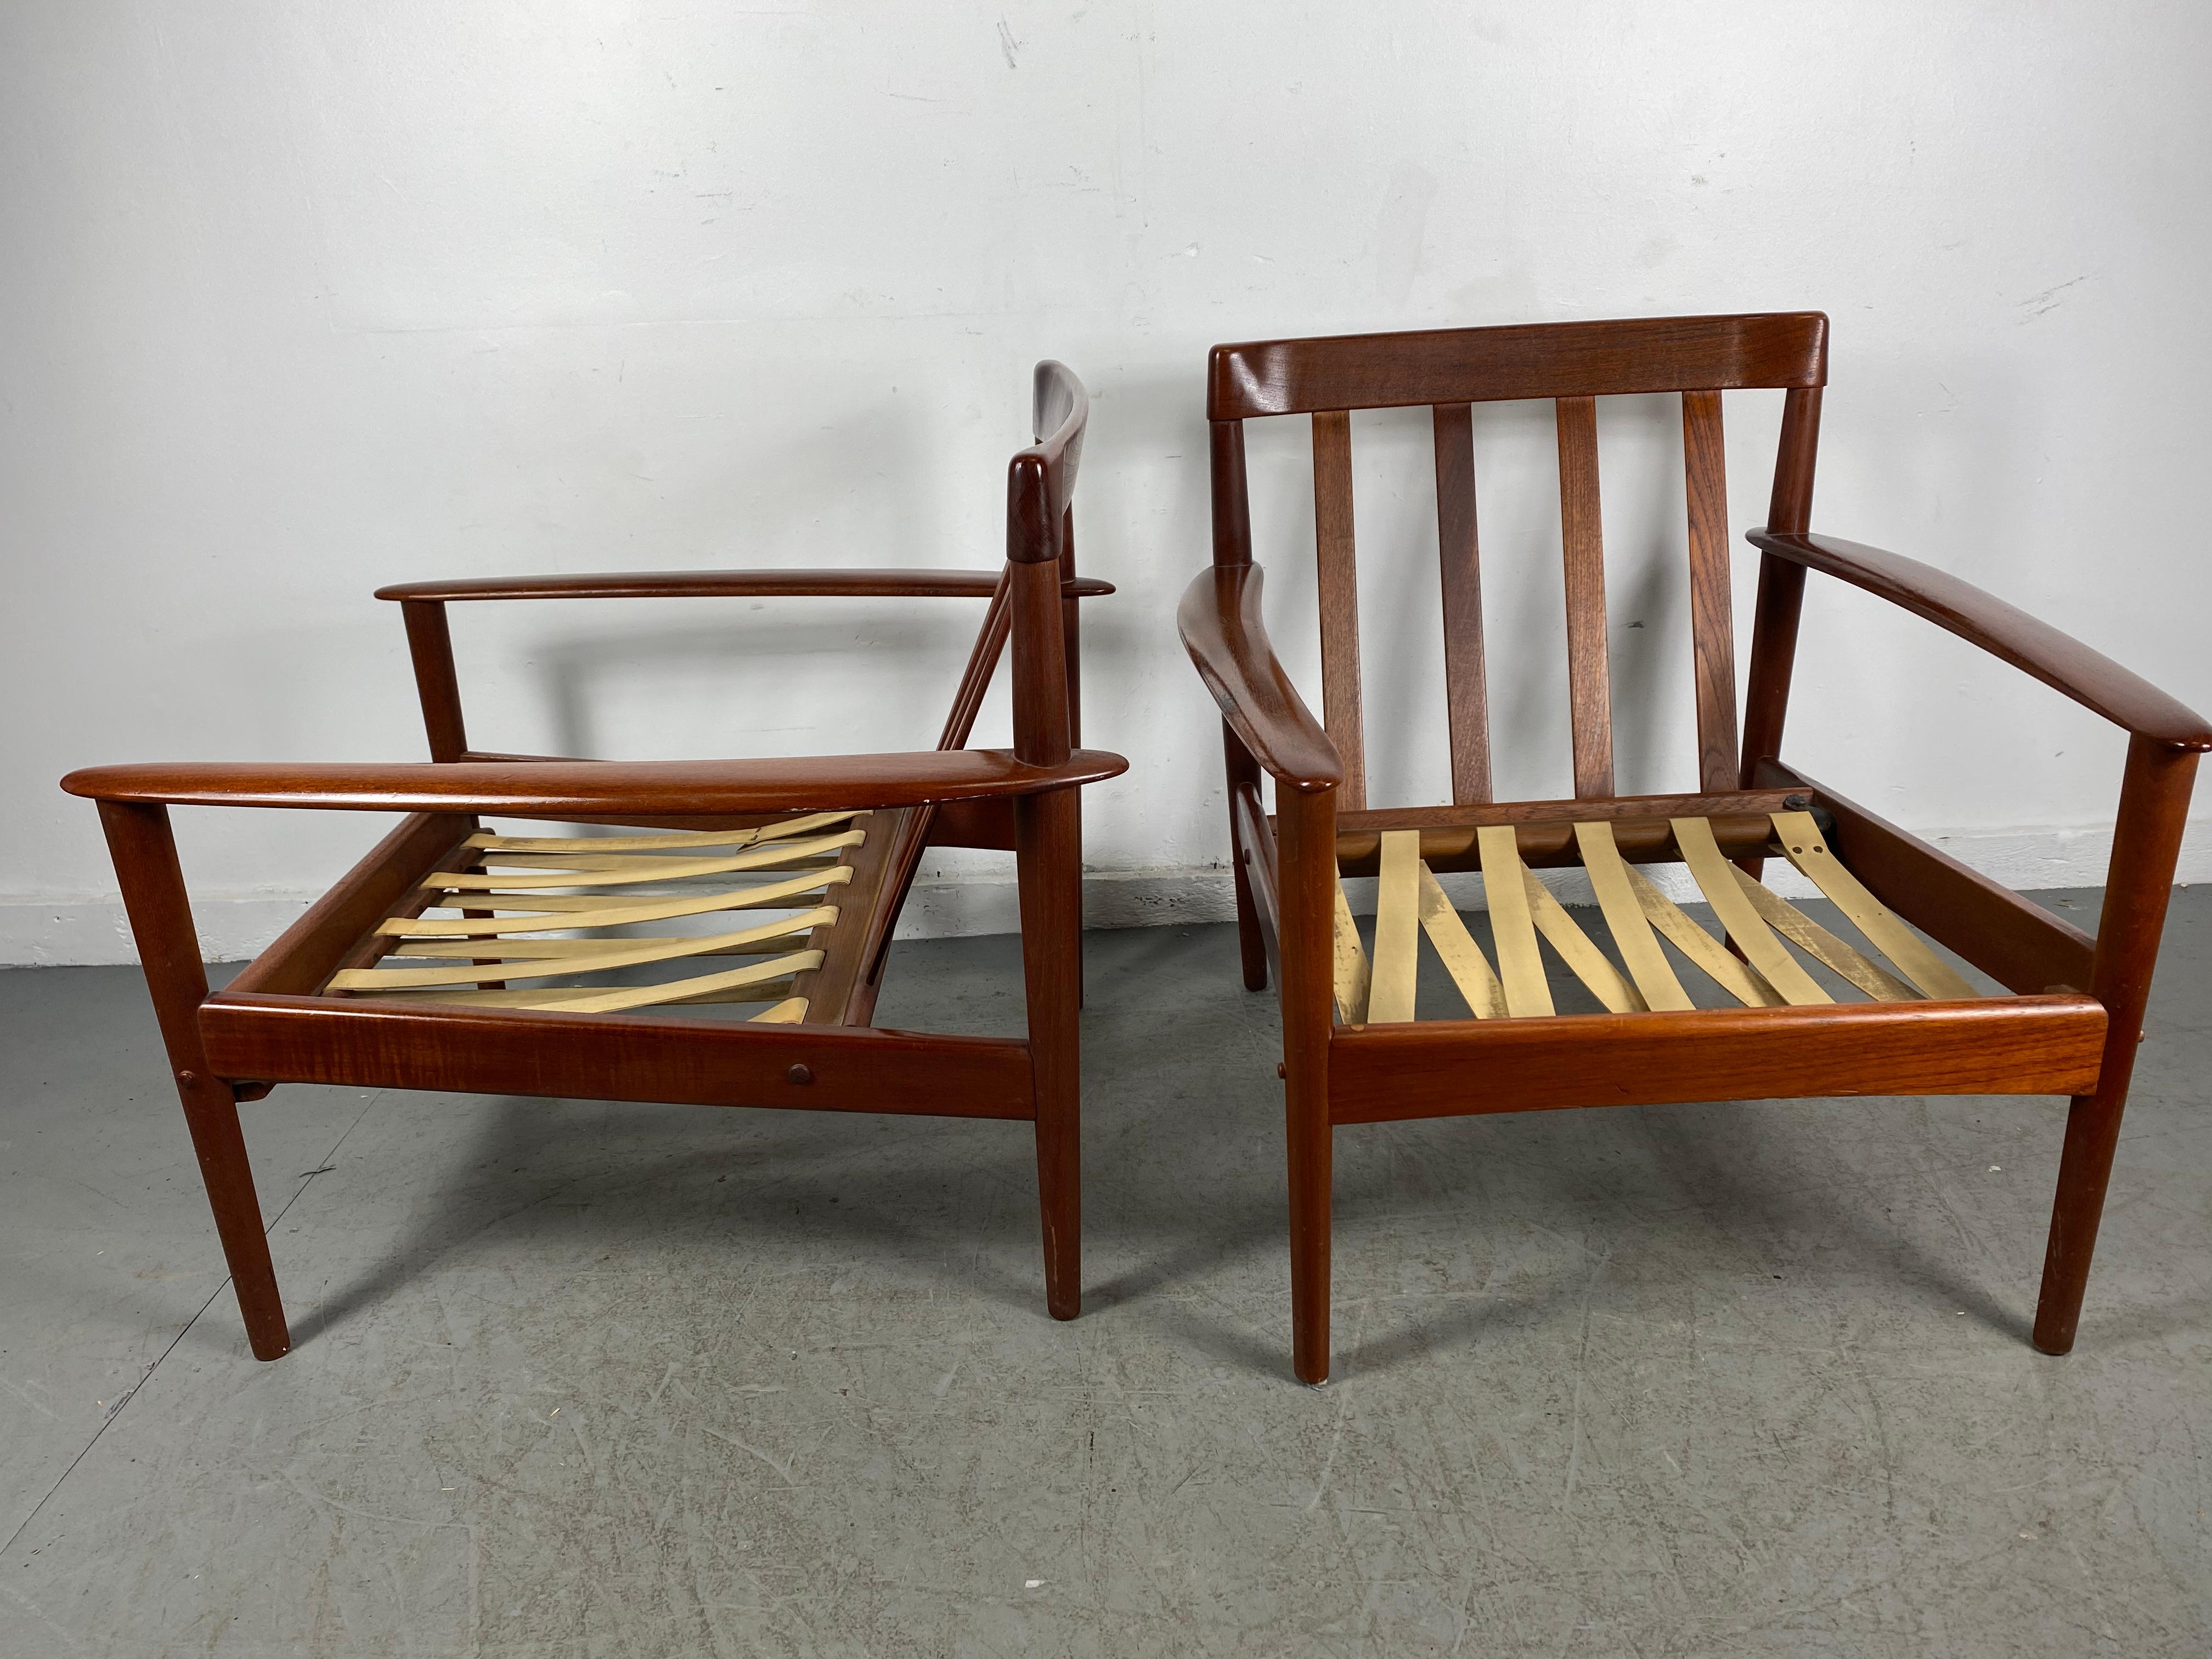 Classic pair teak easy chairs designed by Grete Jalk for P. Jeppesens made in Denmark,, Frames in wonderful original condition,, Retain original strapping,, Original seat and back cushions have been replaced..Superior quality and